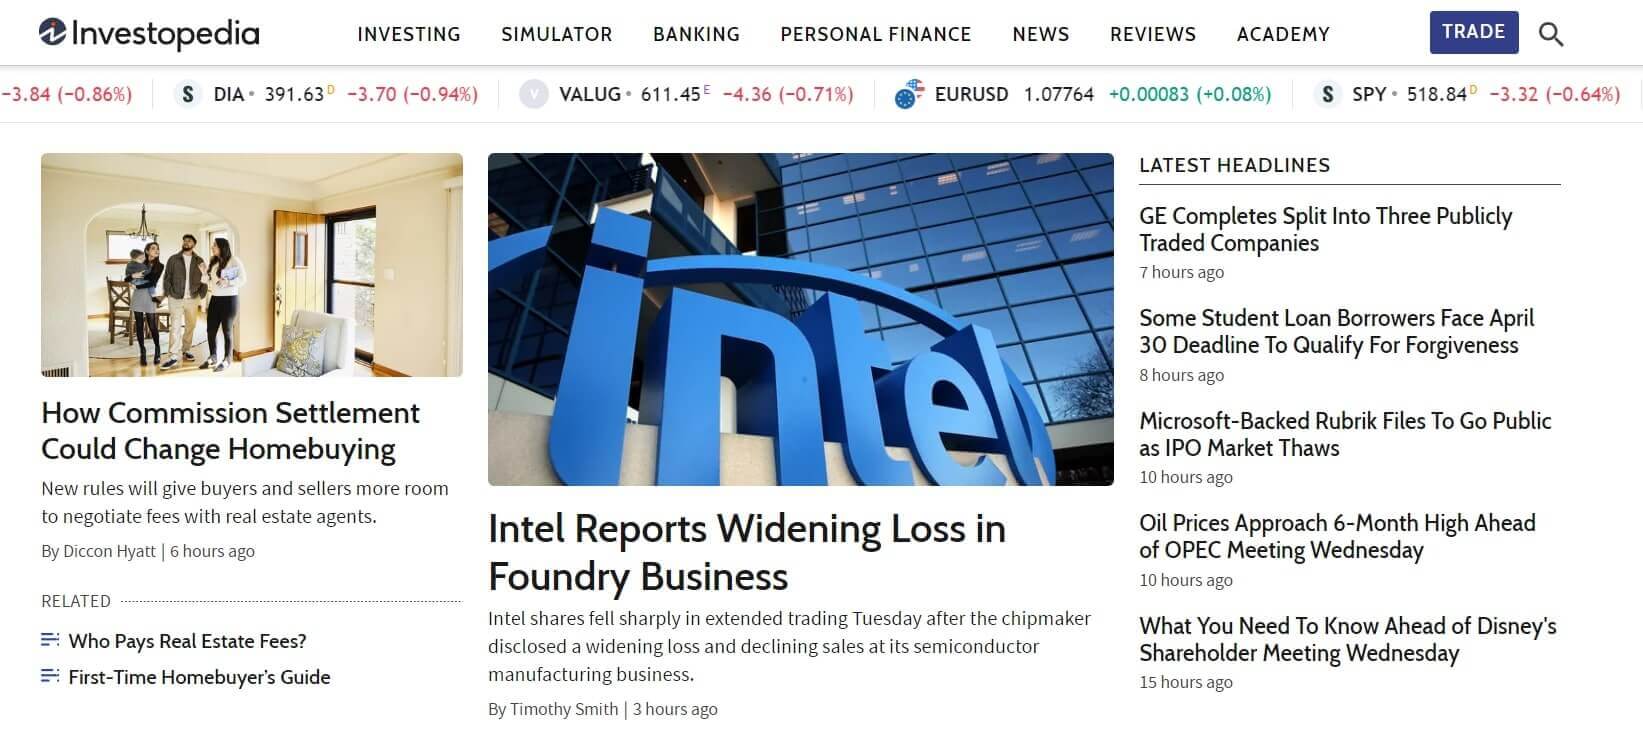 A screenshot of Investopedia showing the latest headlines, various article titles, and summaries.